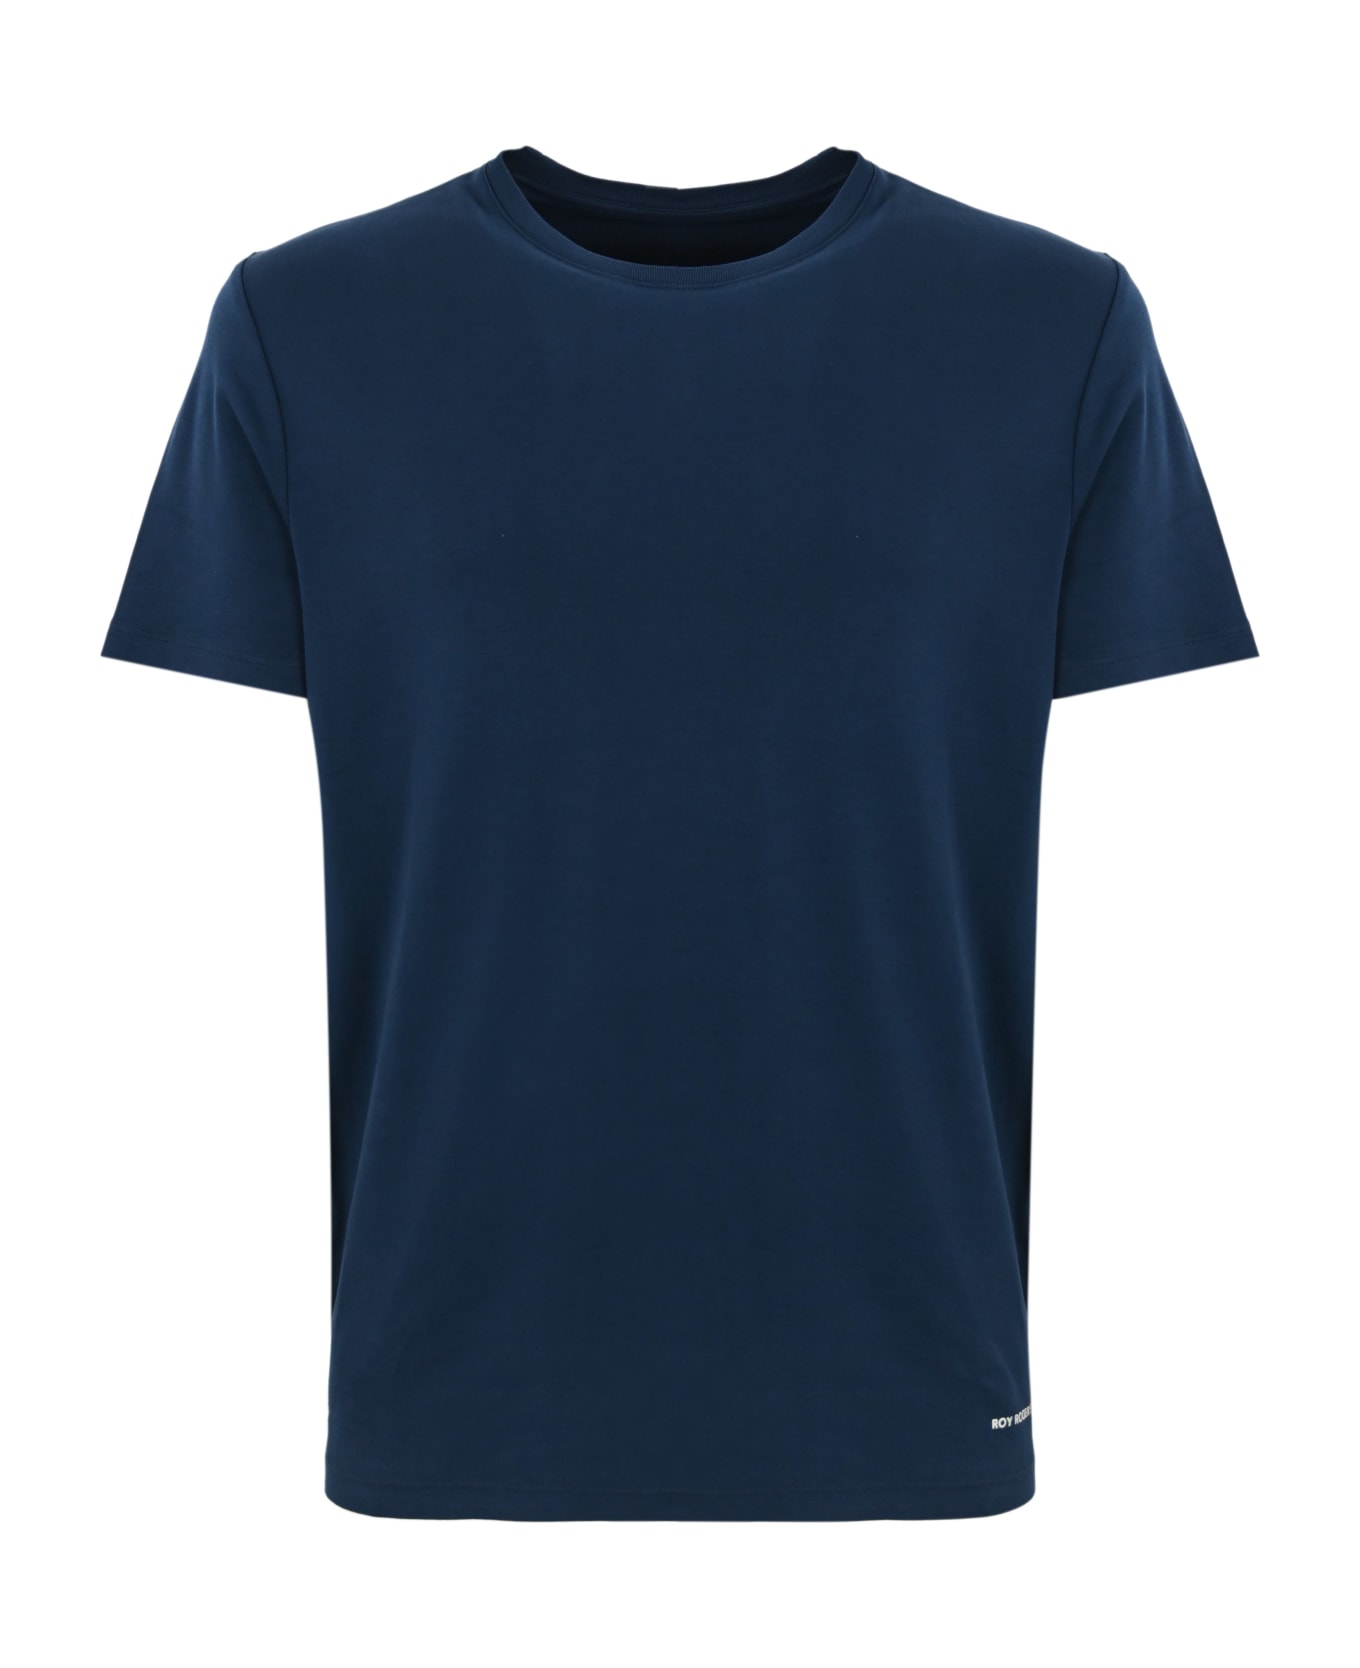 Roy Rogers Cotton T-shirt With Logo - Blue navy シャツ